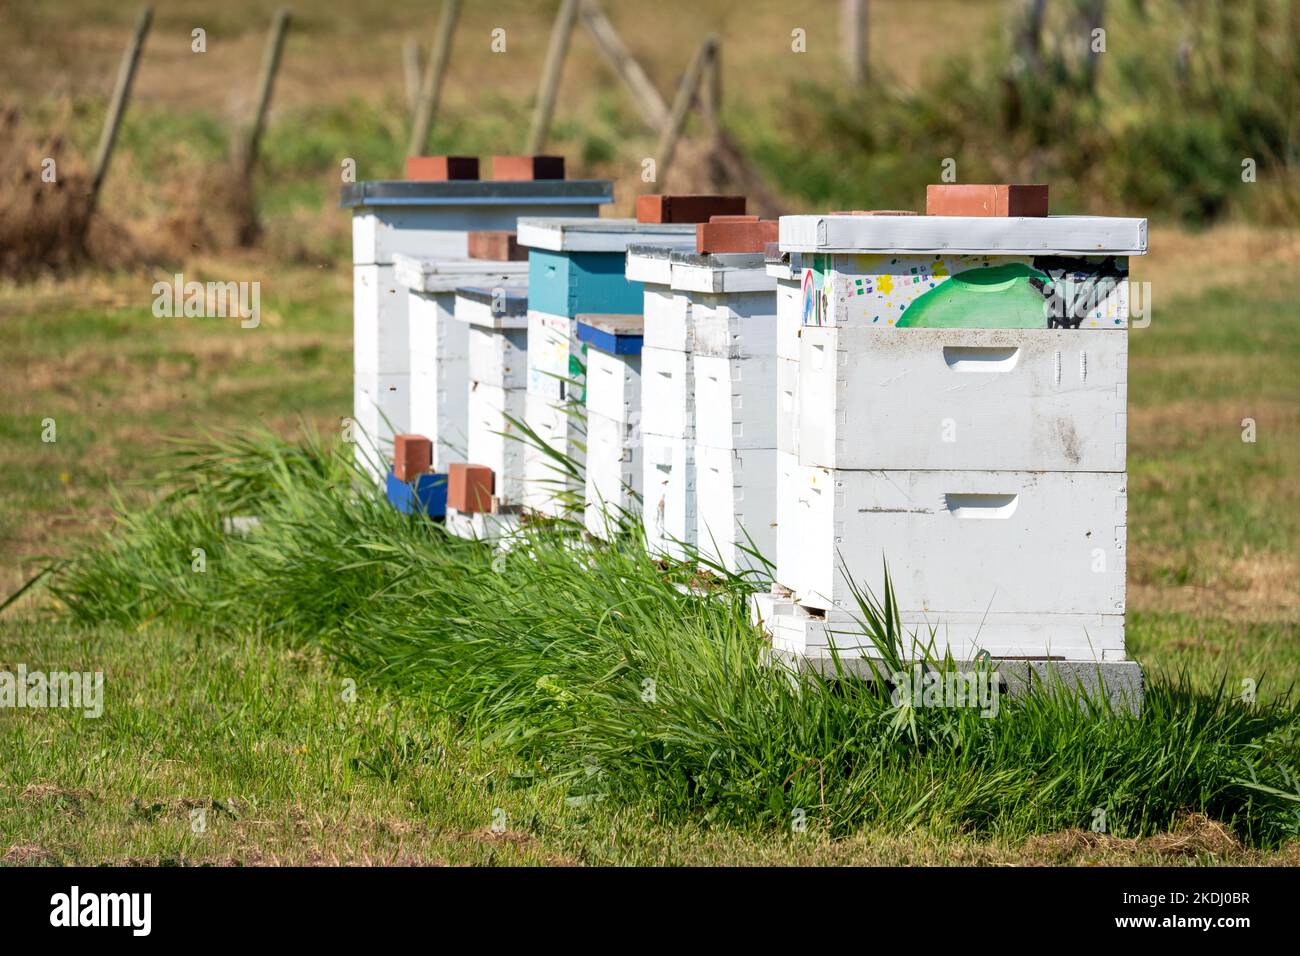 Chimacum, Washington, USA.  Langstroth beehives in a row in a rural setting, with colorful children's artwork on them. Stock Photo